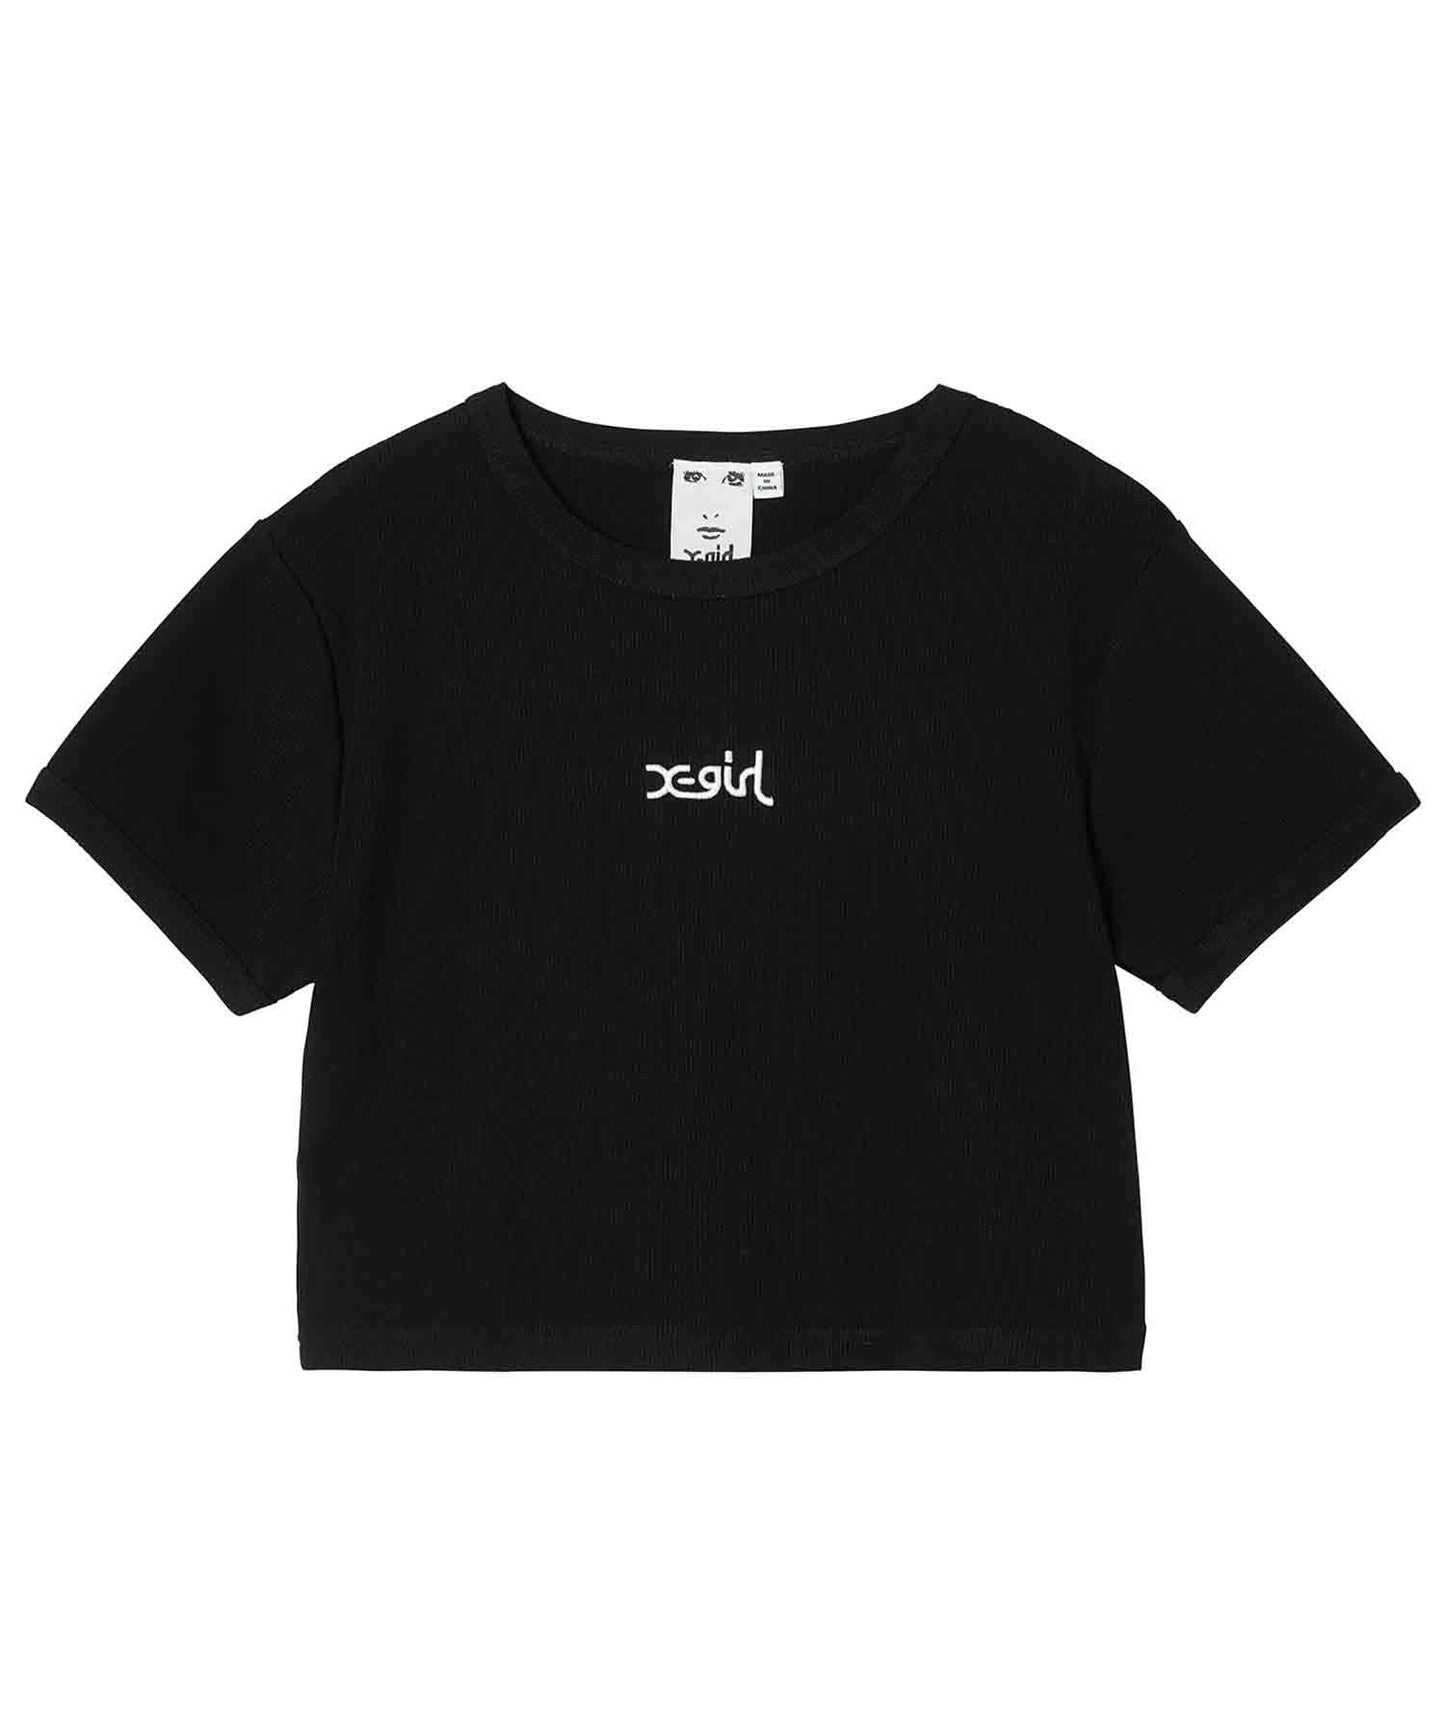 MILLS LOGO S/S CROPPED TOP